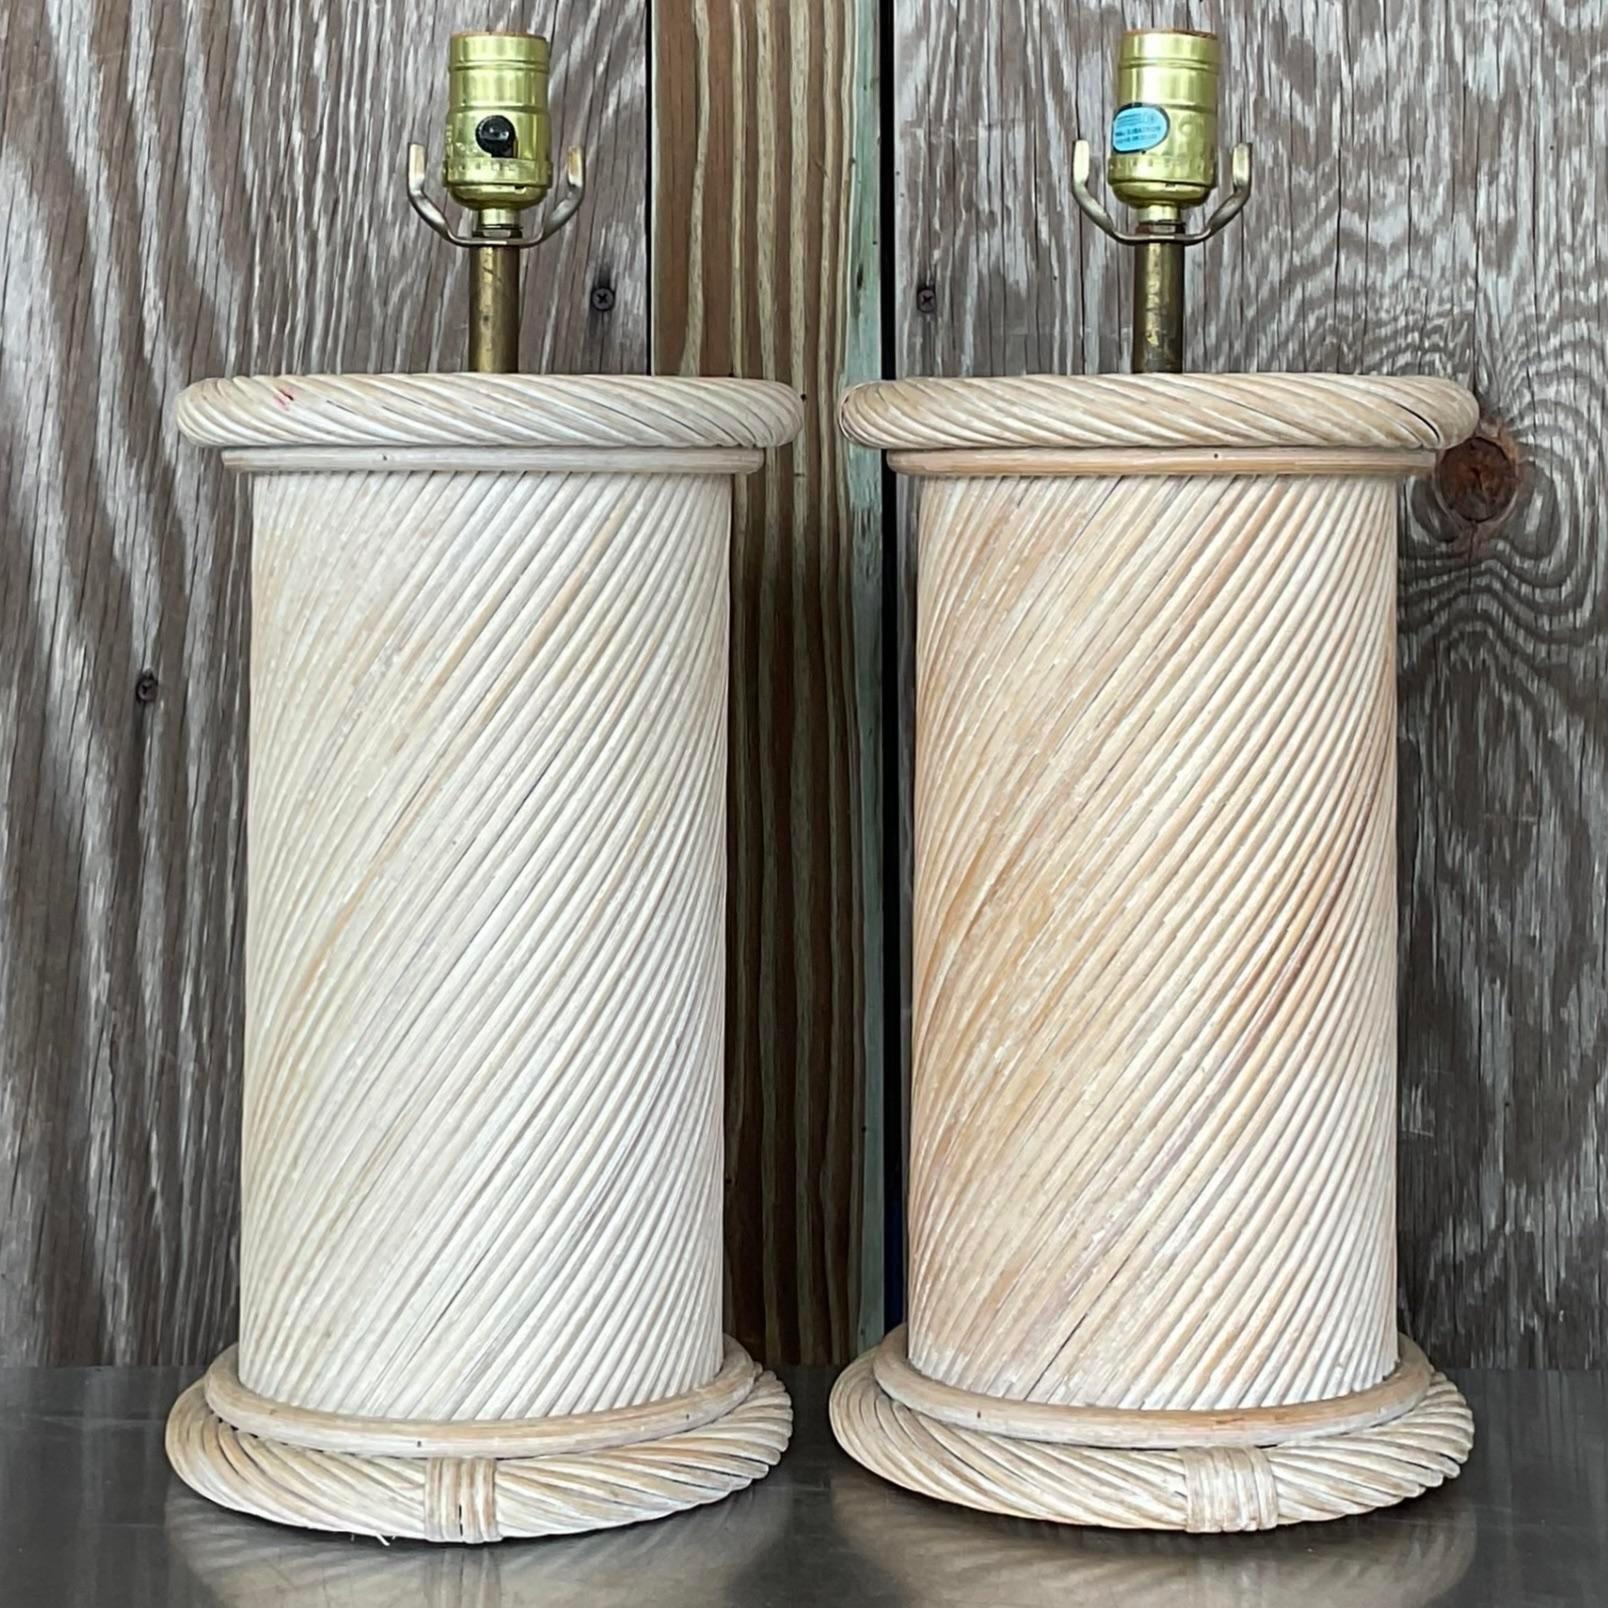 A fabulous pair of vintage Coastal table lamps. Chic swirl pencil reed construction in a washed finish. Acquired from a Palm Beach estate.